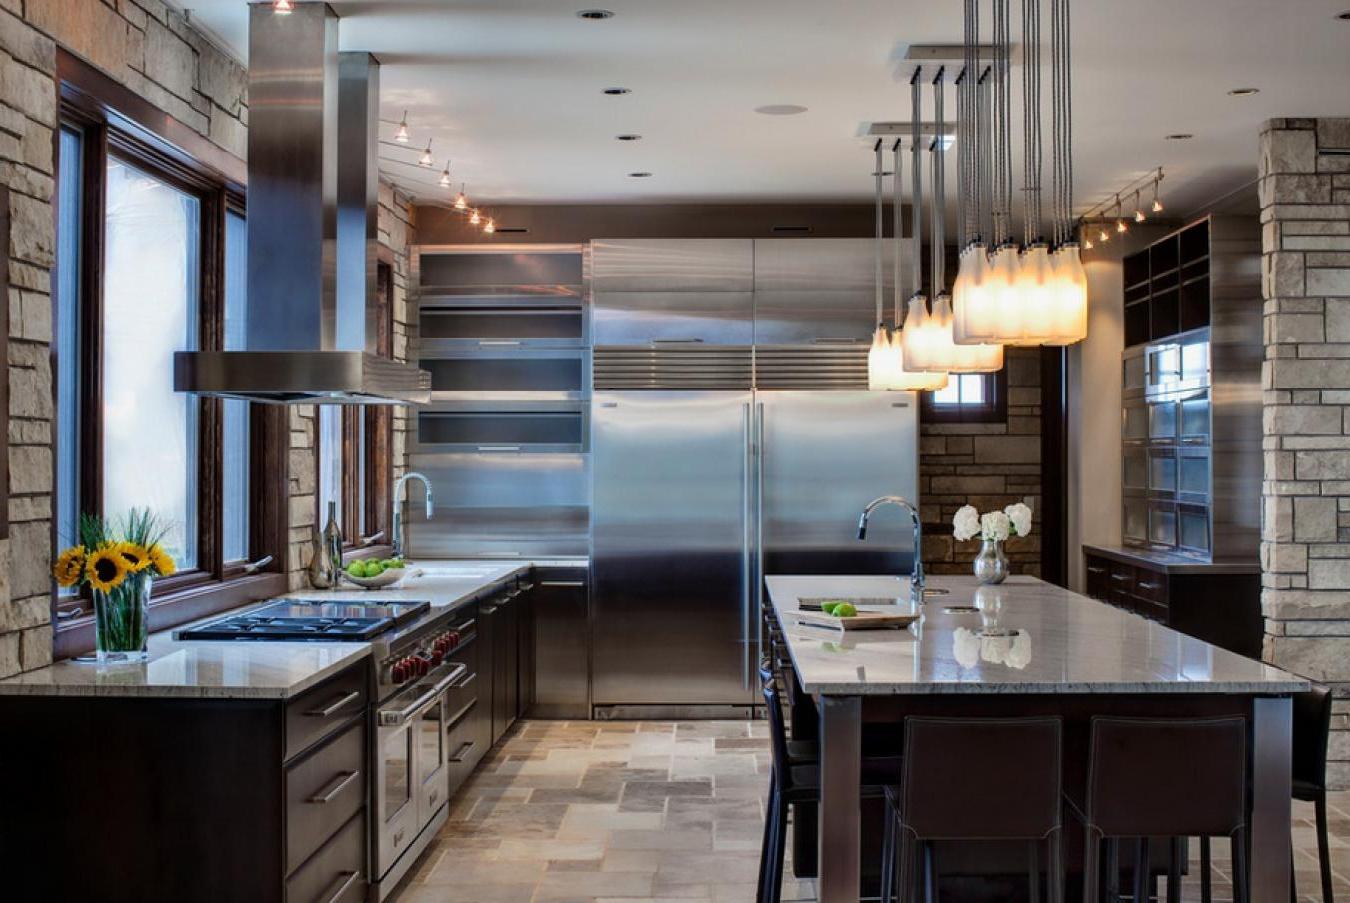 Modern-kitchen-interior-with-a-high-tech-cuisine-and-big-fridge-along-with-fine-dining-space-with-beautiful-hanging-lamps-decor